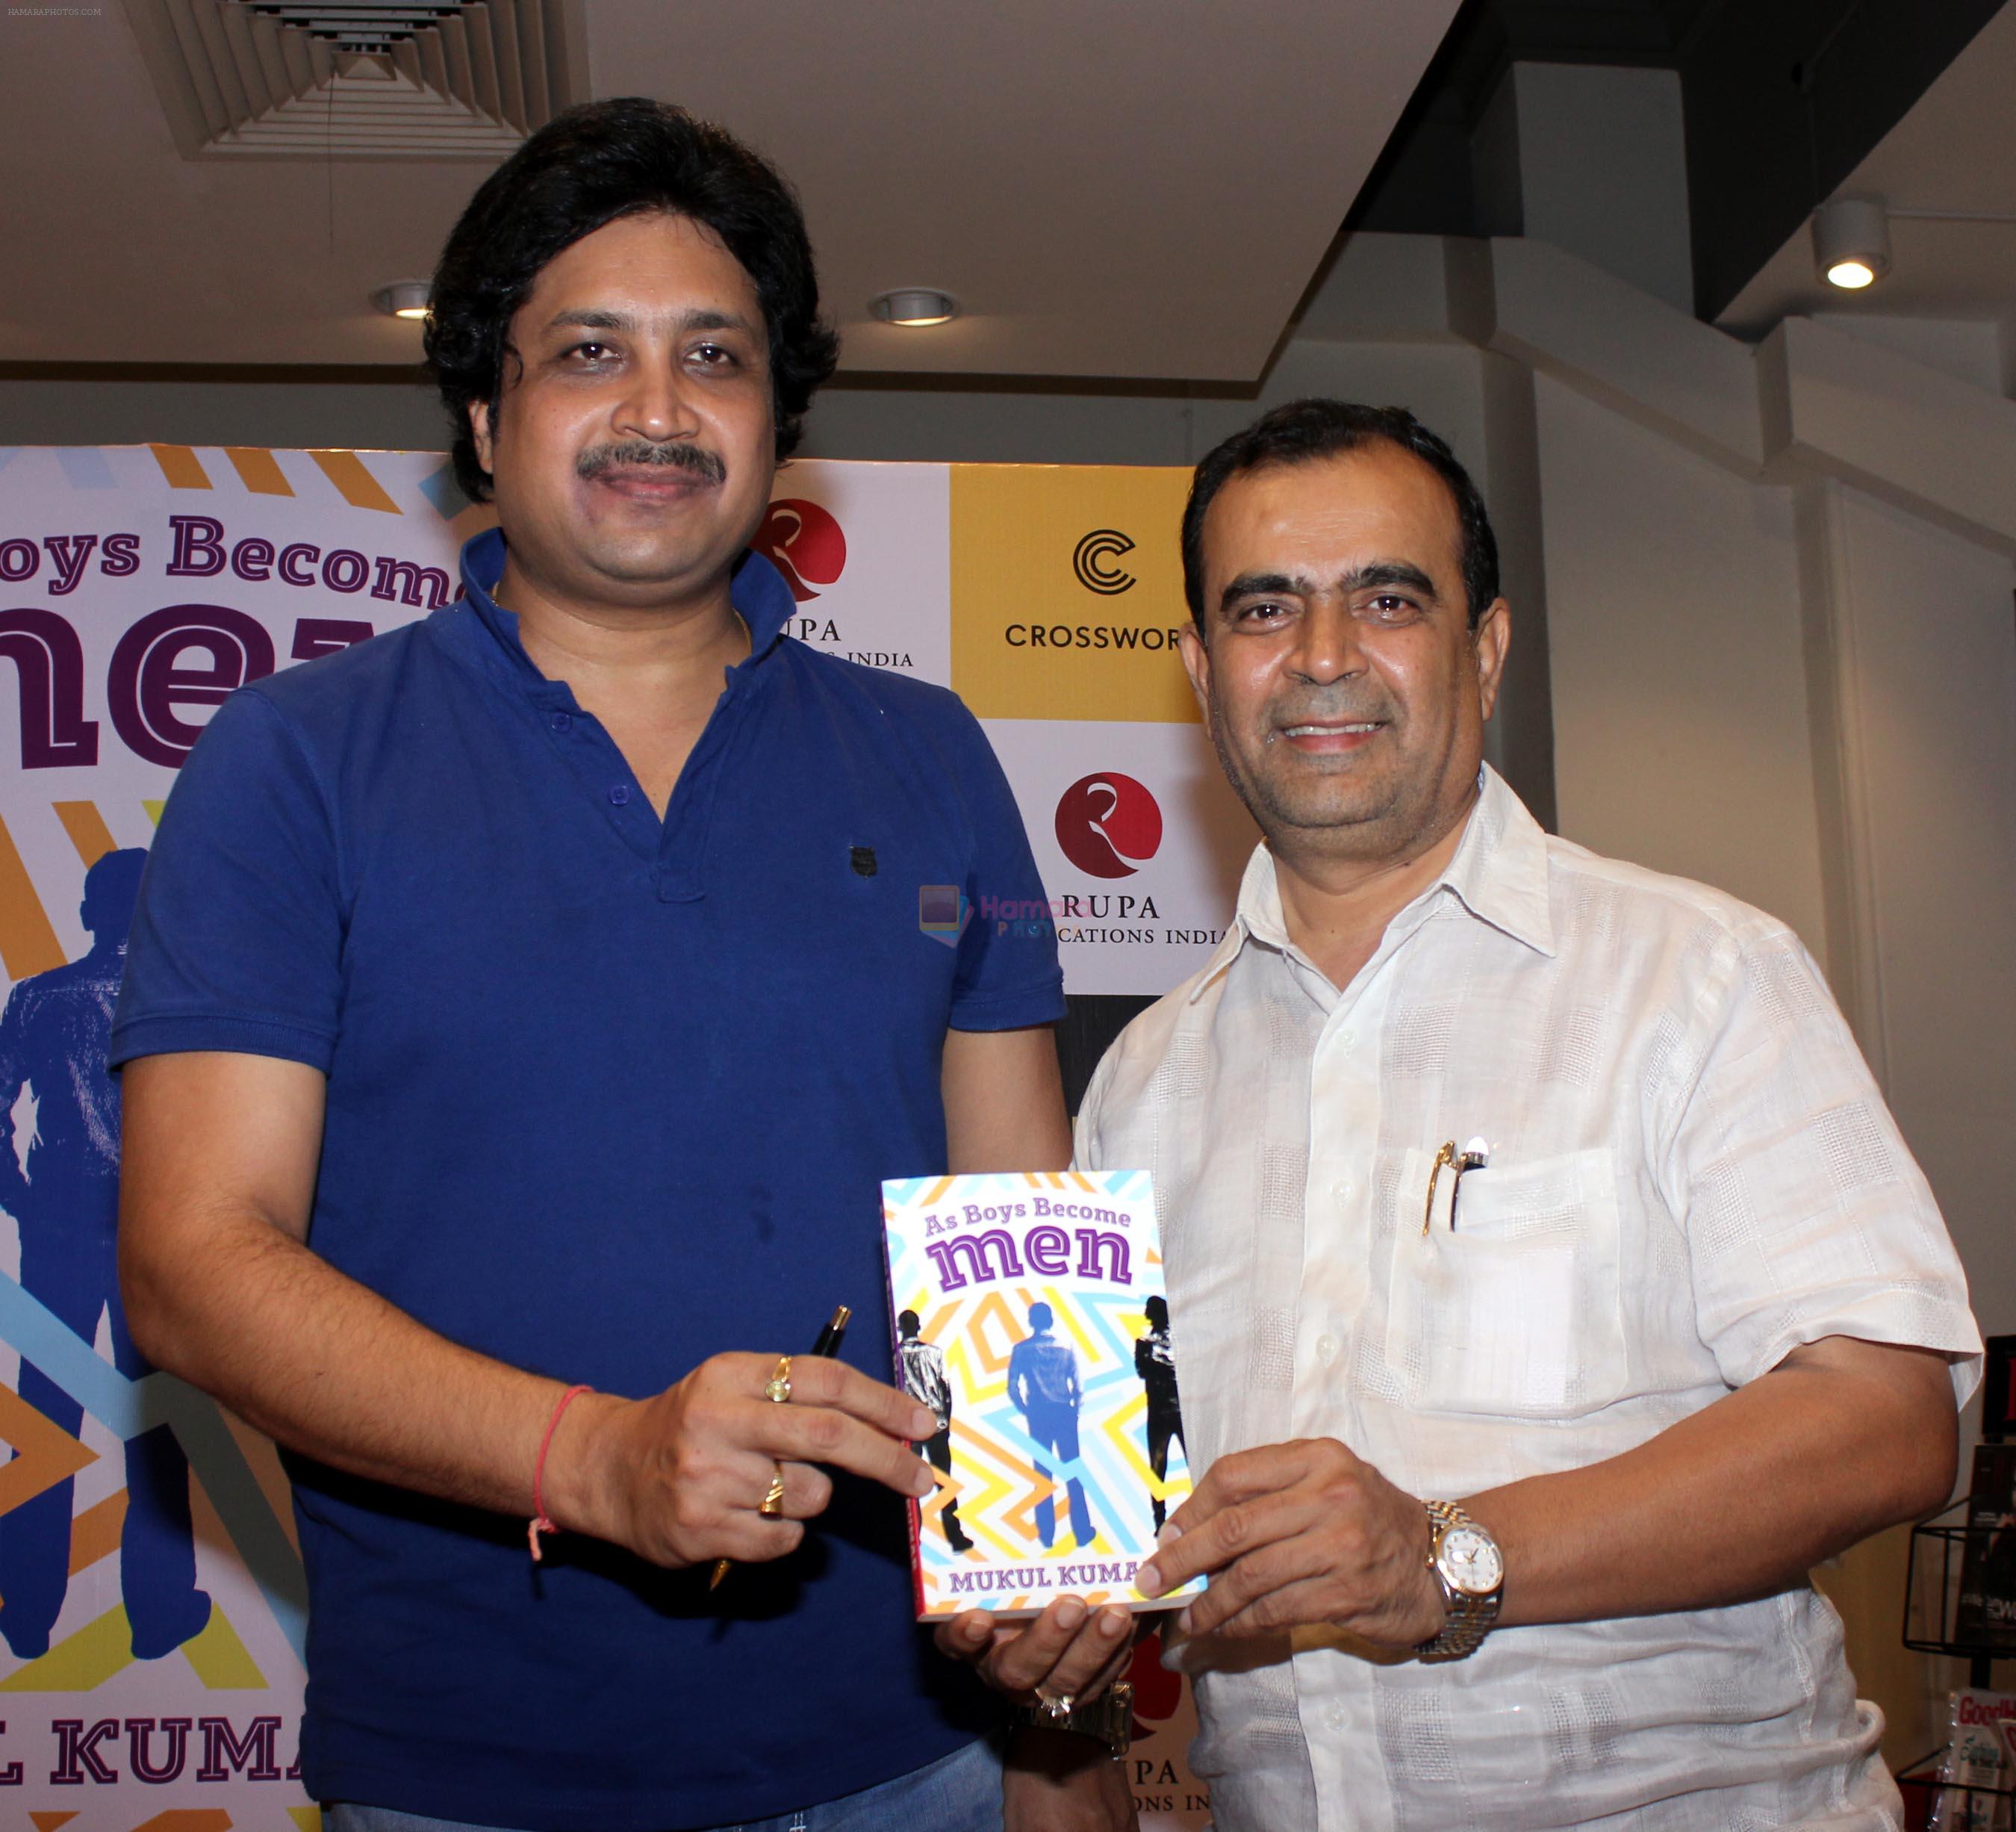 mukul & yogesh lakhani at the launch of book As Boy become Men written by Indian railway officer Mukul Kumar in Crosswords on 6th April 2016